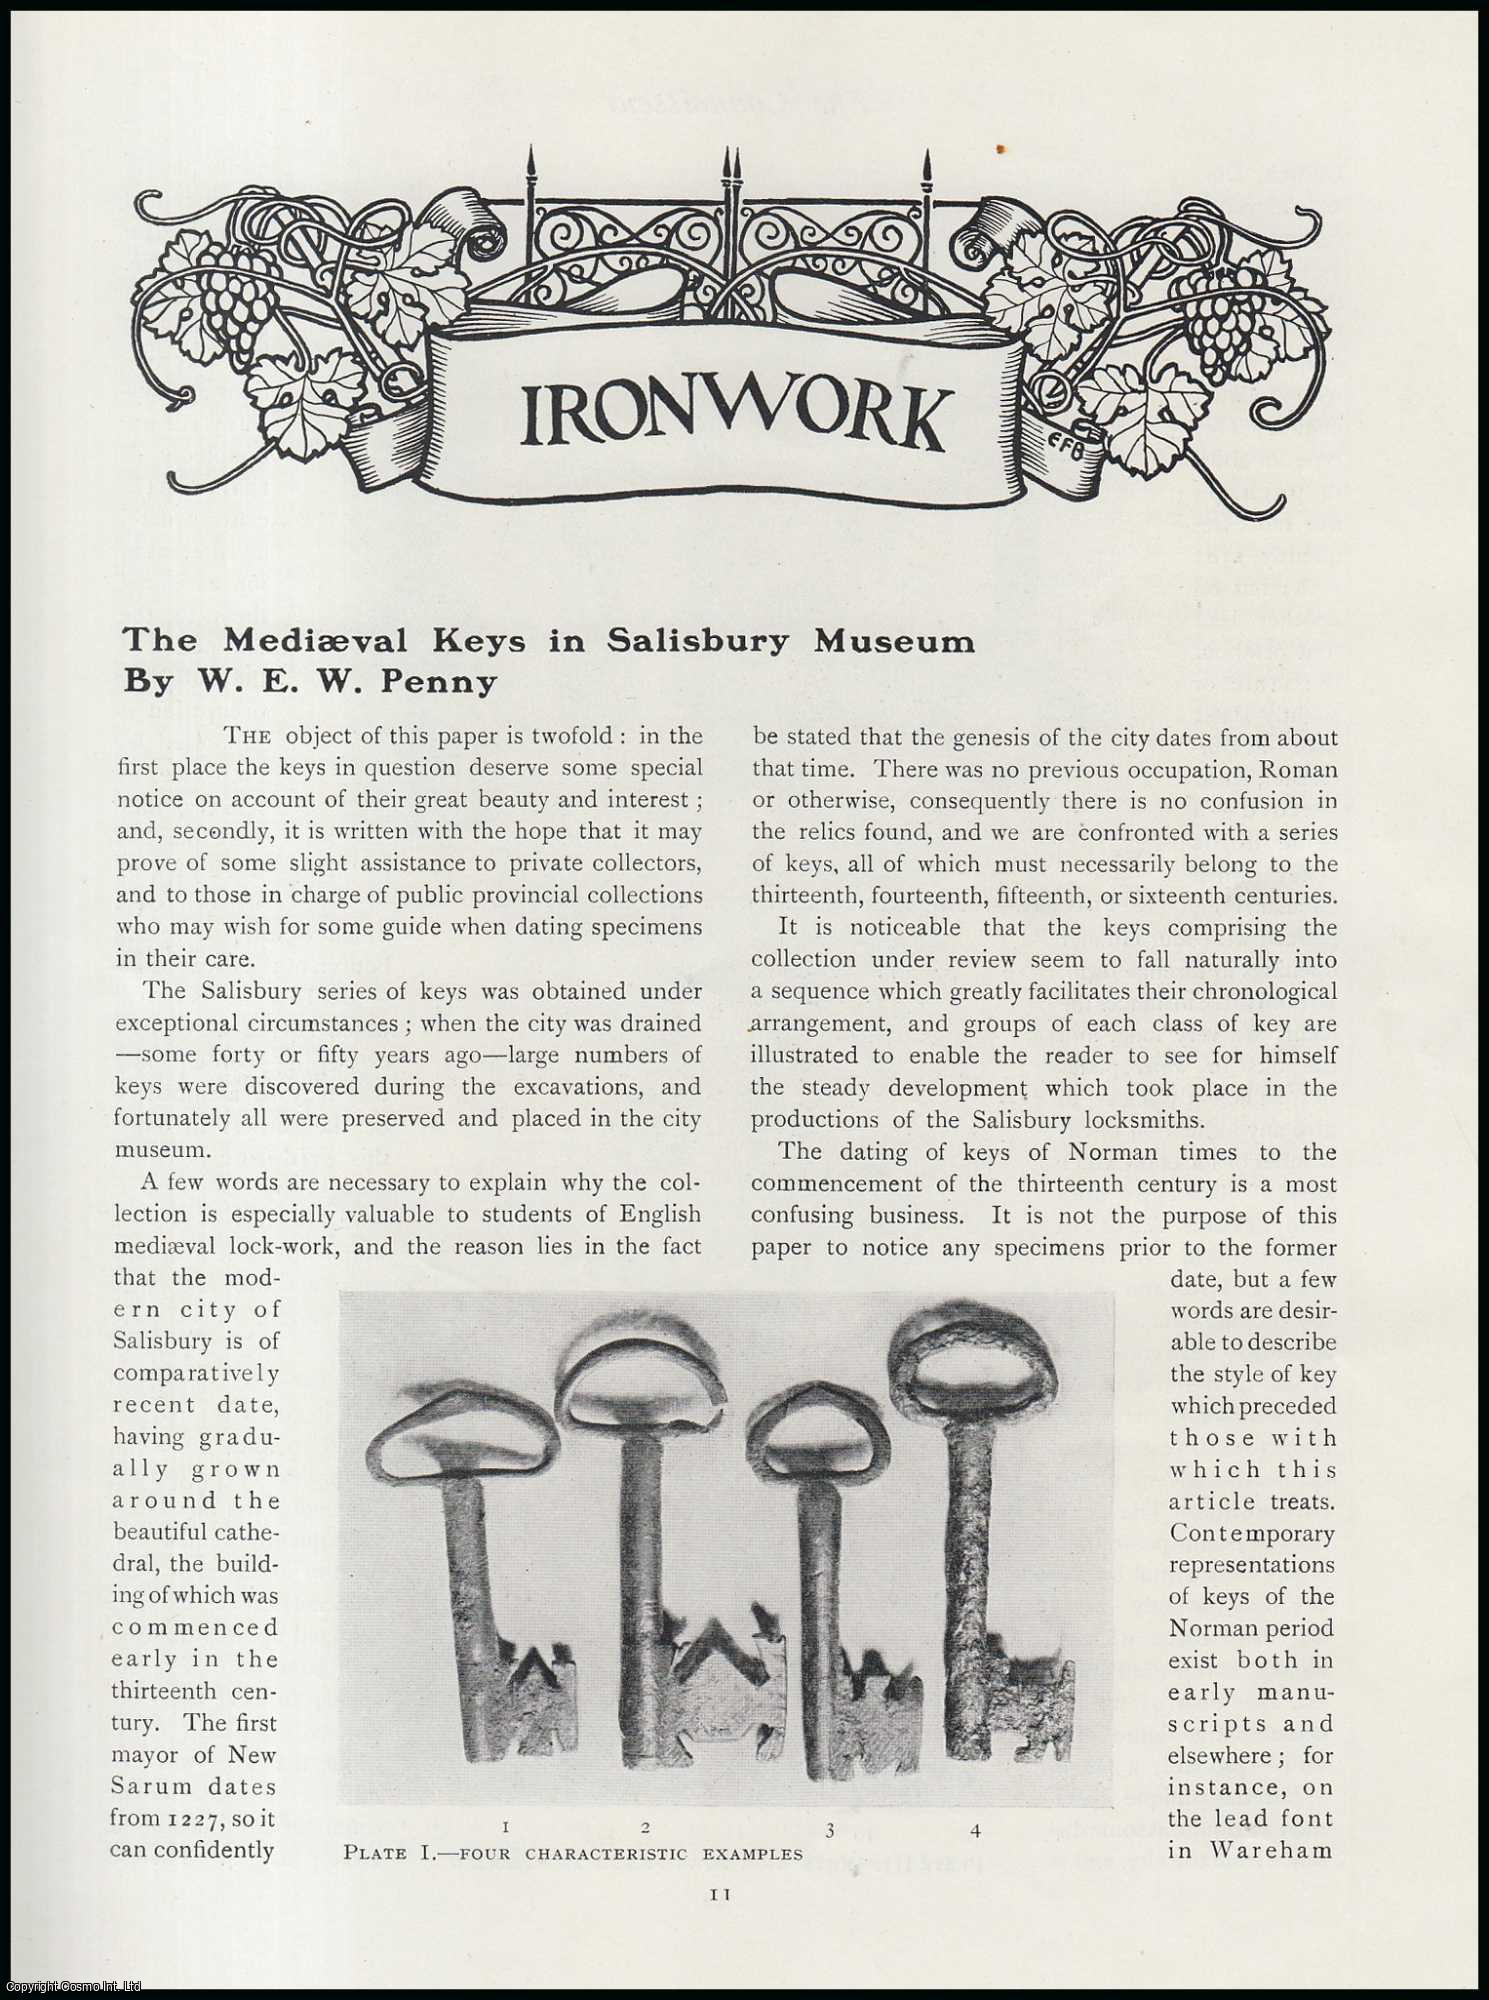 W.E.W. Penny - The Mediaeval Keys of Norman Times in Salisbury Museum. An original article from The Connoisseur, 1911.